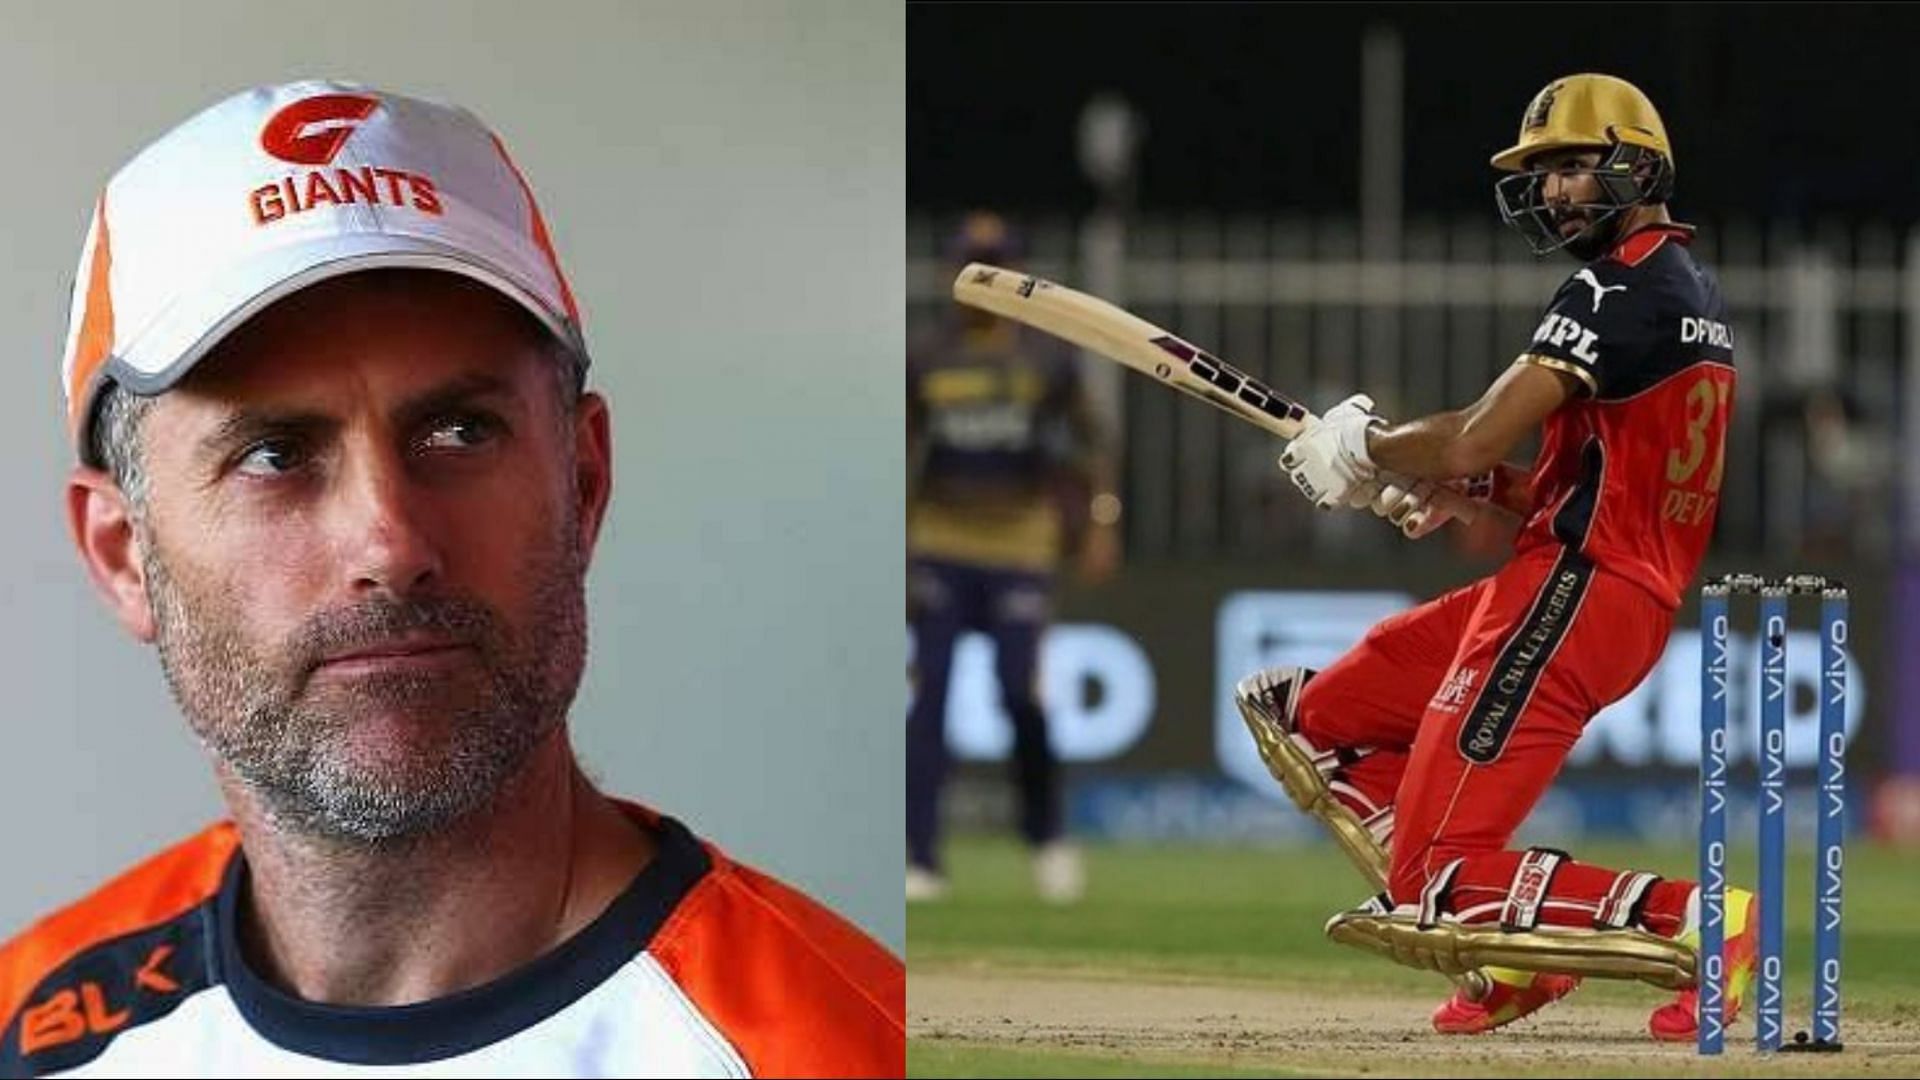 New assistant coach of Sunrisers Hyderabad Simon Katich can try to sign Devdutt Padikkal at the IPL Auction 2022